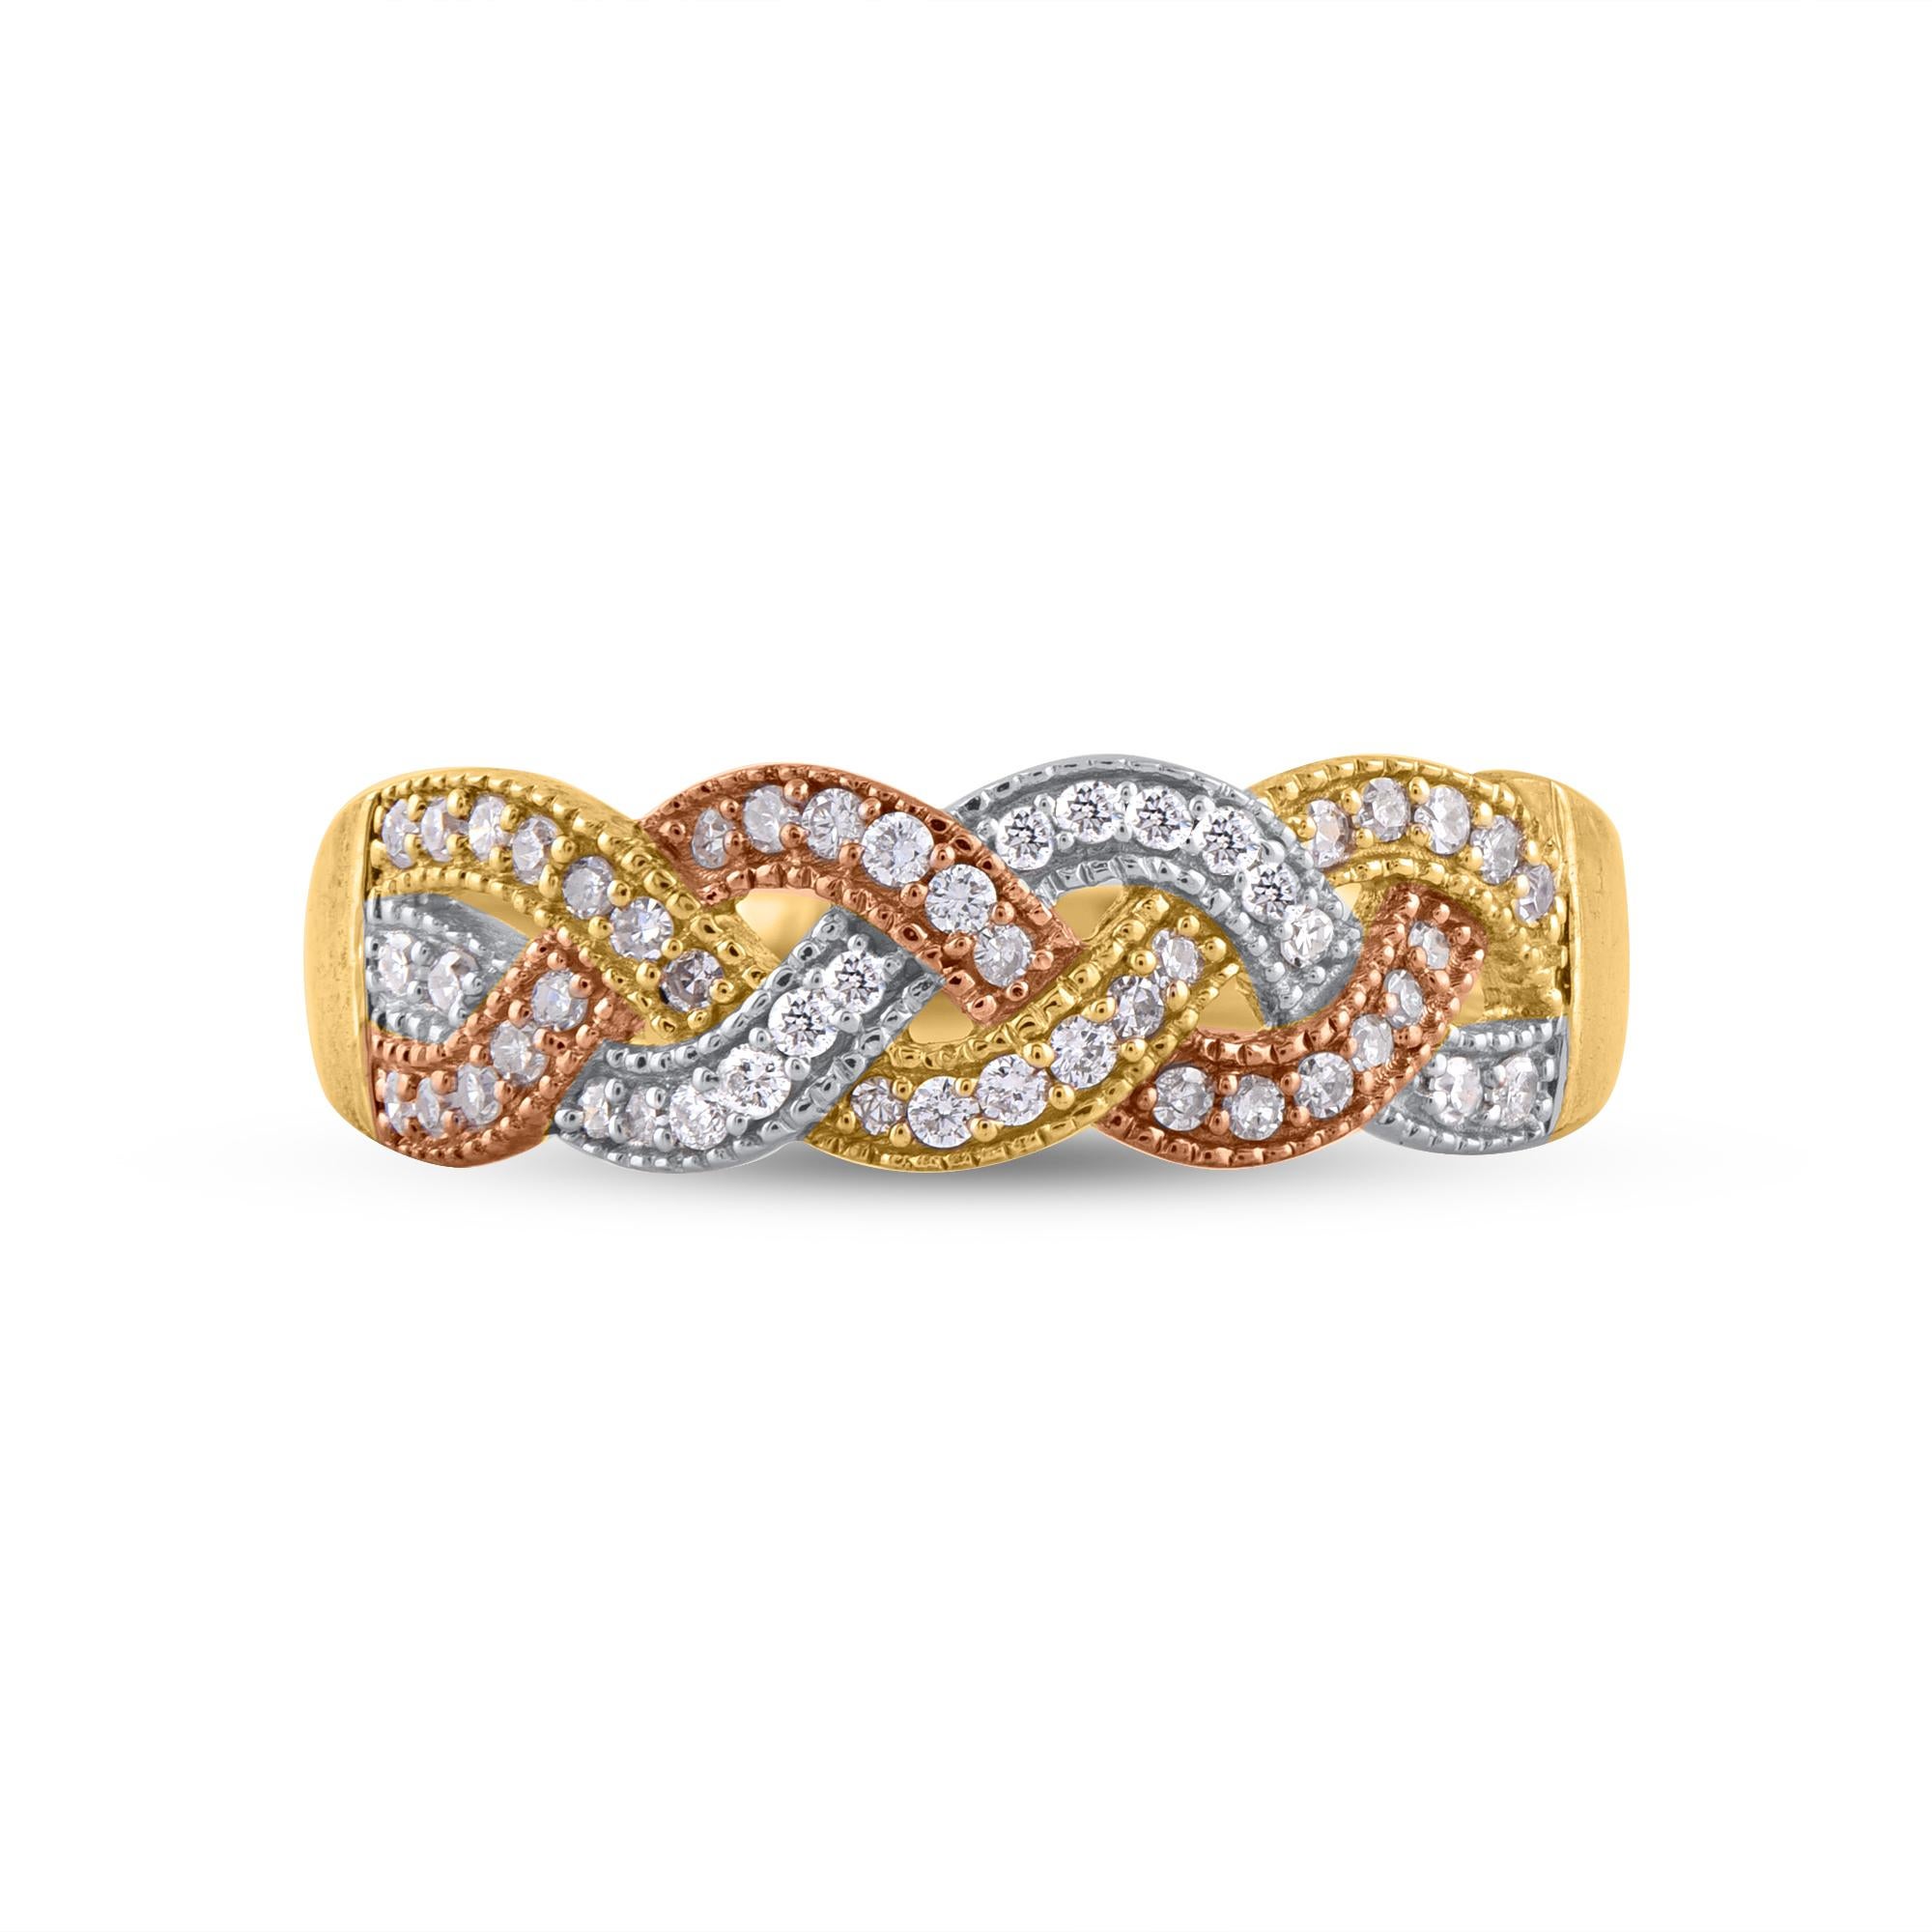 This Wedding Band is expertly crafted in 14 Karat yellow gold and features 51 single cut and brilliant cut round diamonds set in pave setting. We only use 100% natural and conflict free diamonds which sparkles in H-I color I2 clarity. This wedding